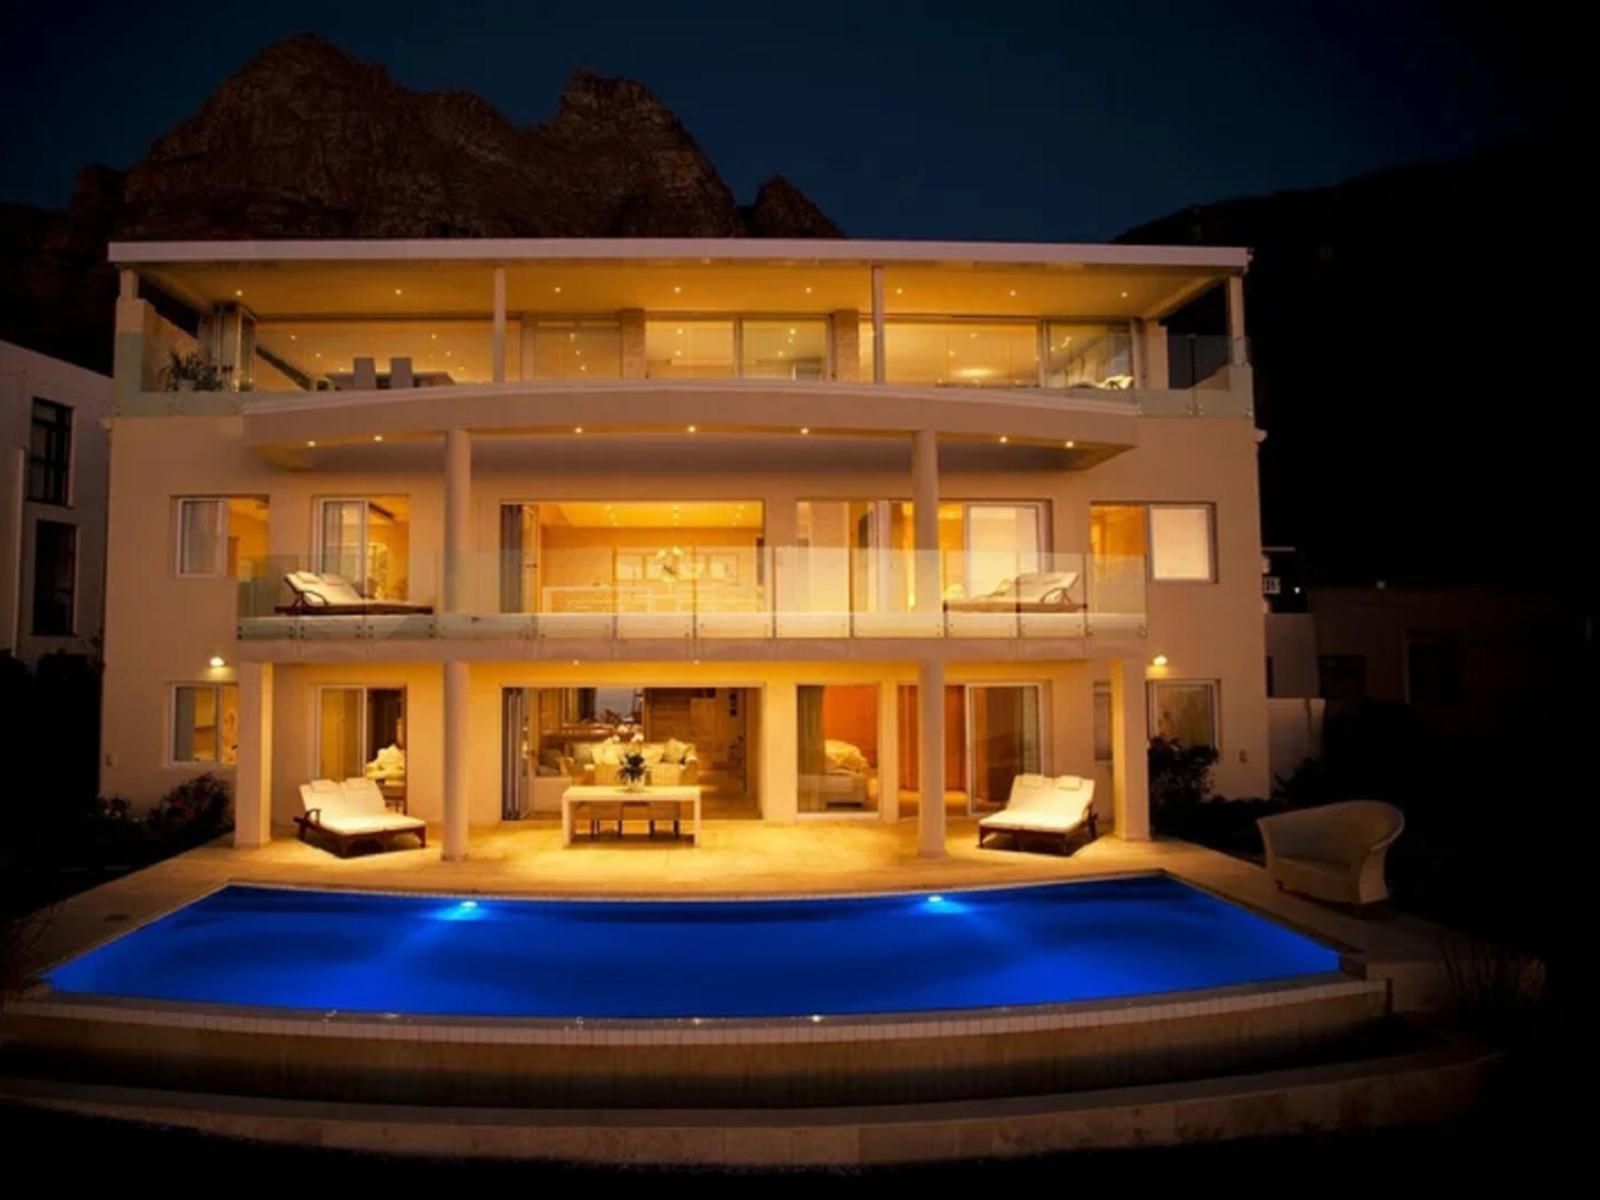 Atlantique Villa Camps Bay Bakoven Cape Town Western Cape South Africa House, Building, Architecture, Swimming Pool